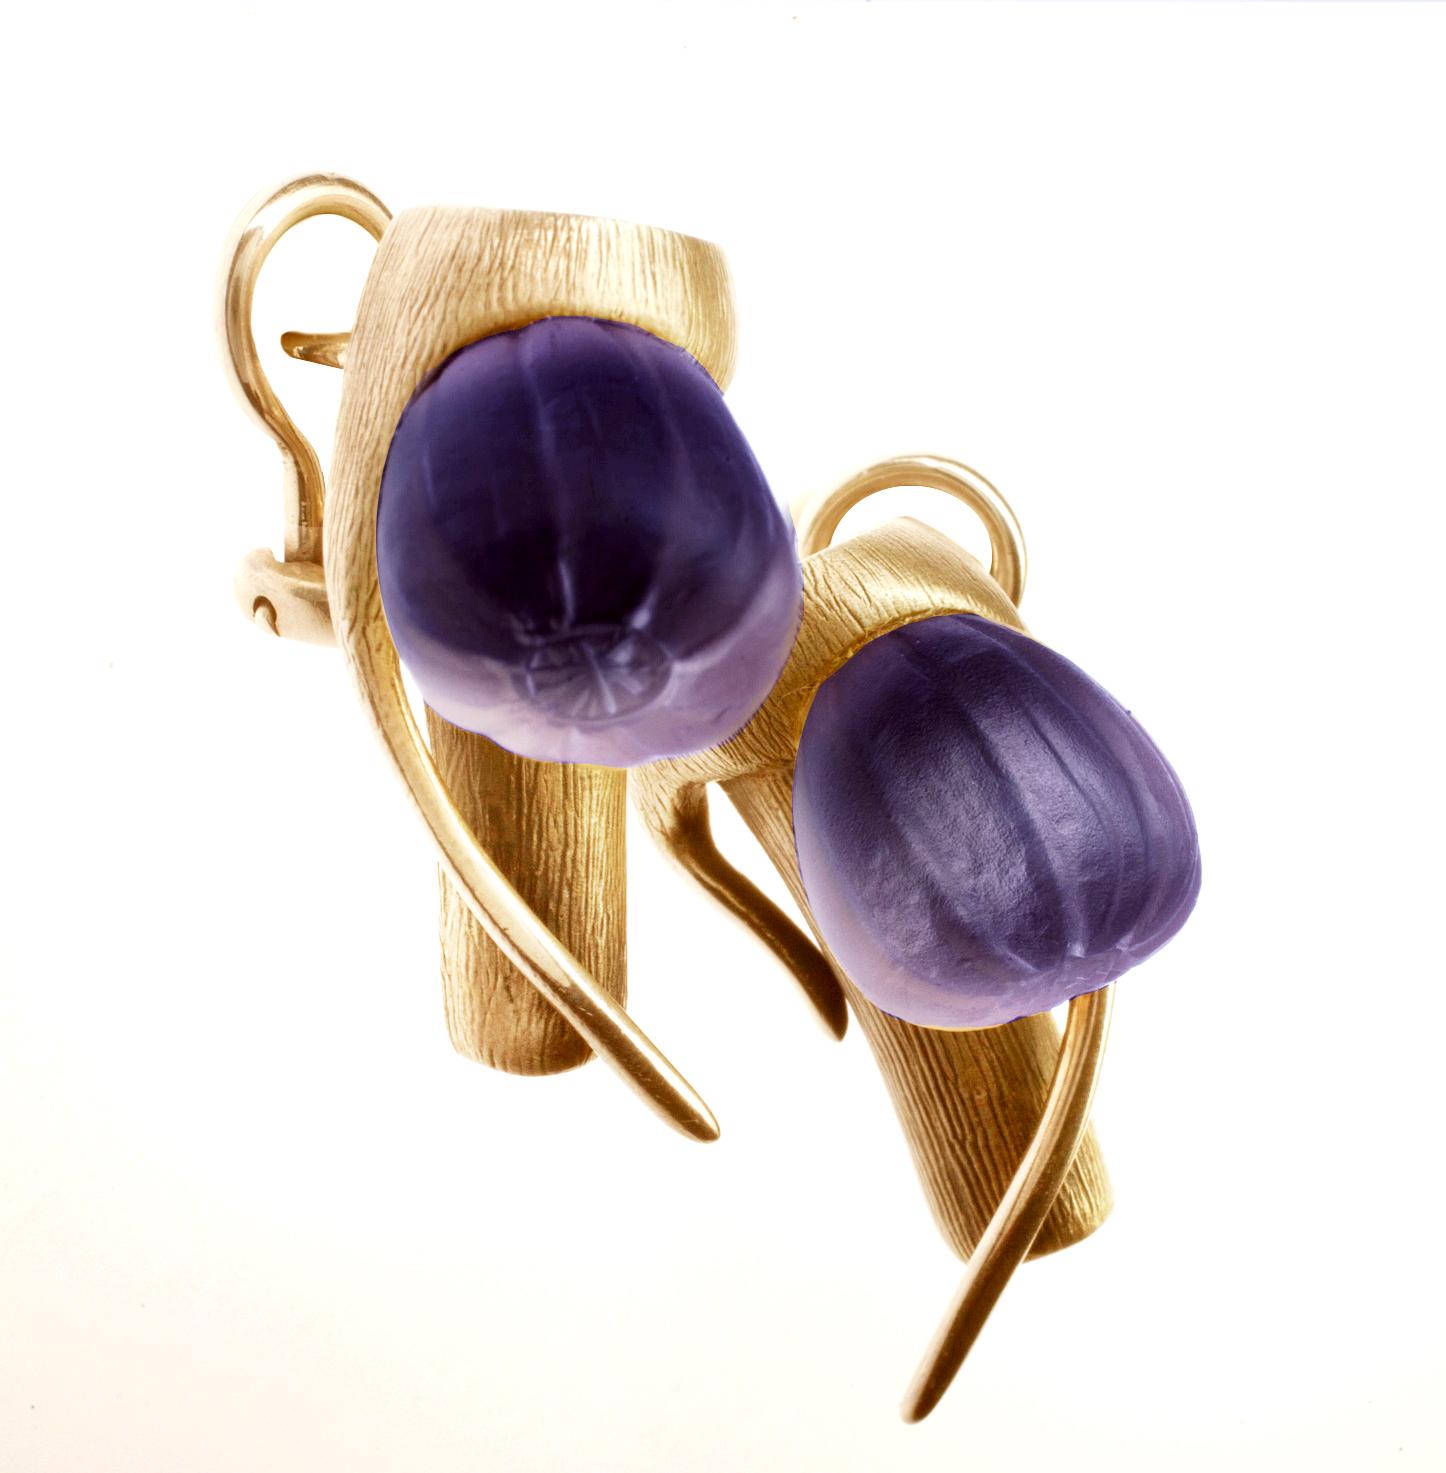 These Fig Garden Art Nouveau style cocktail earrings are made of 14 karat rose gold and are part of a collection that was featured in Harper's Bazaar UA and Vogue UA. Actress Anne Ratte-Polle chose to wear them on the red carpet of the 64th